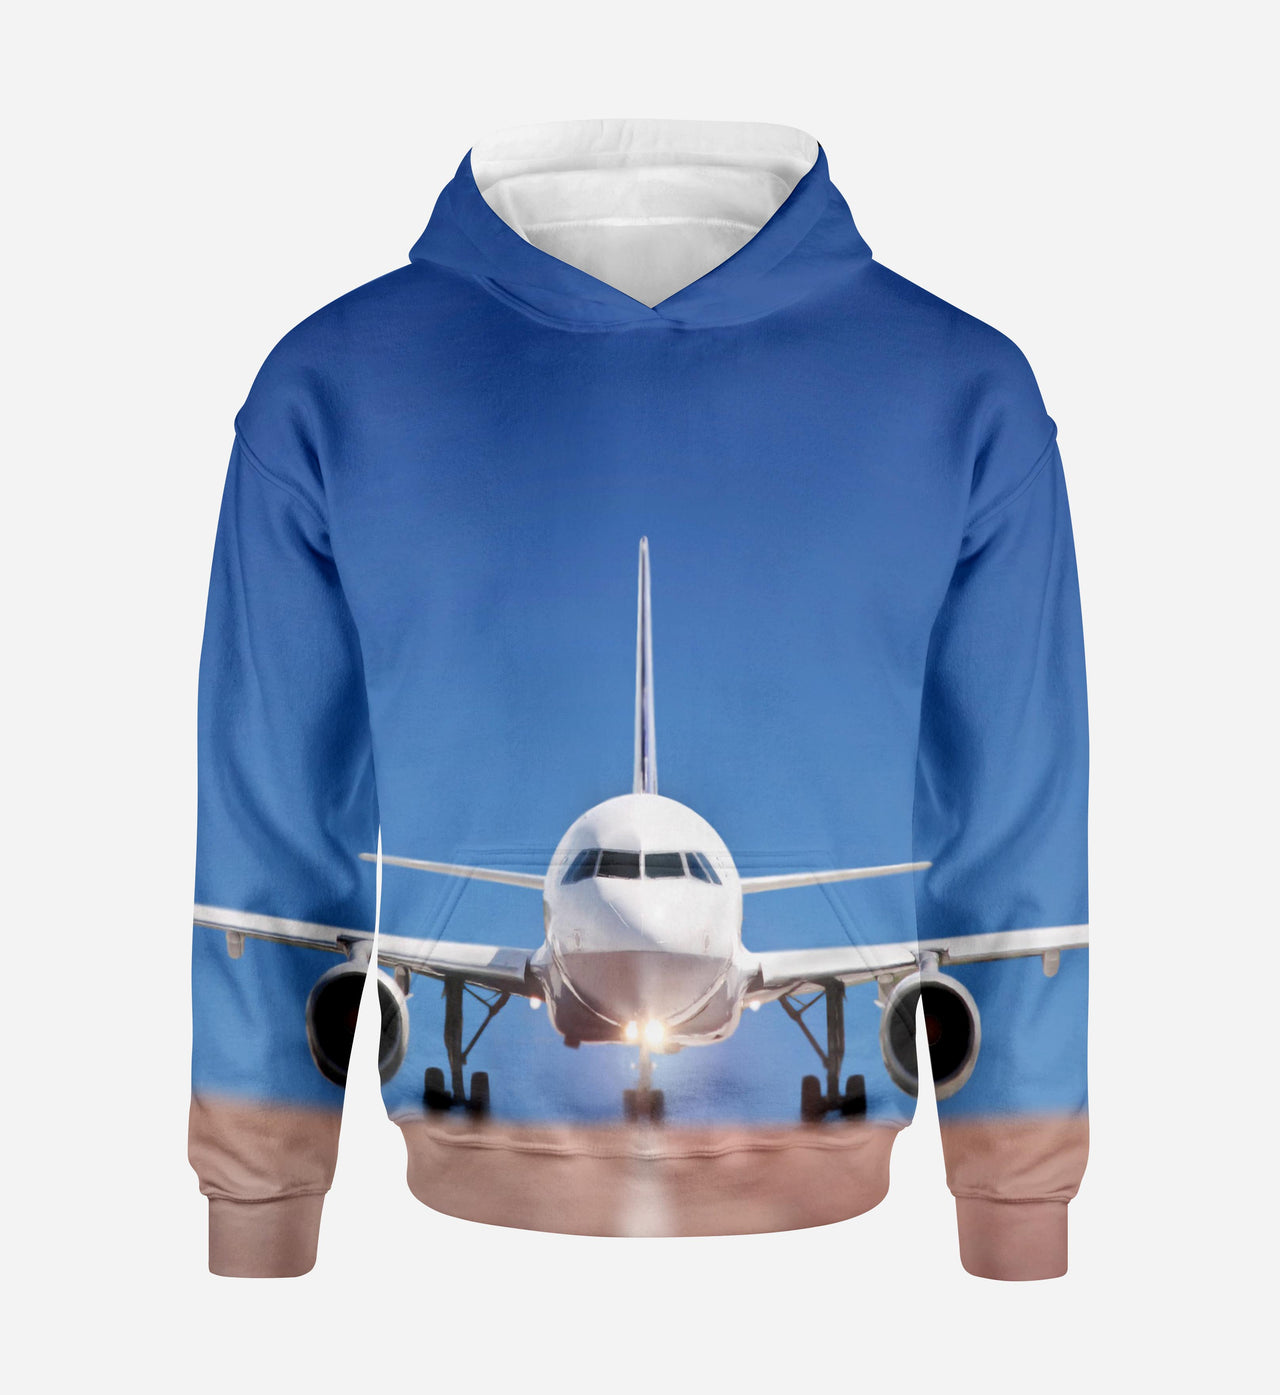 Face to Face with Airbus A320 Printed 3D Hoodies